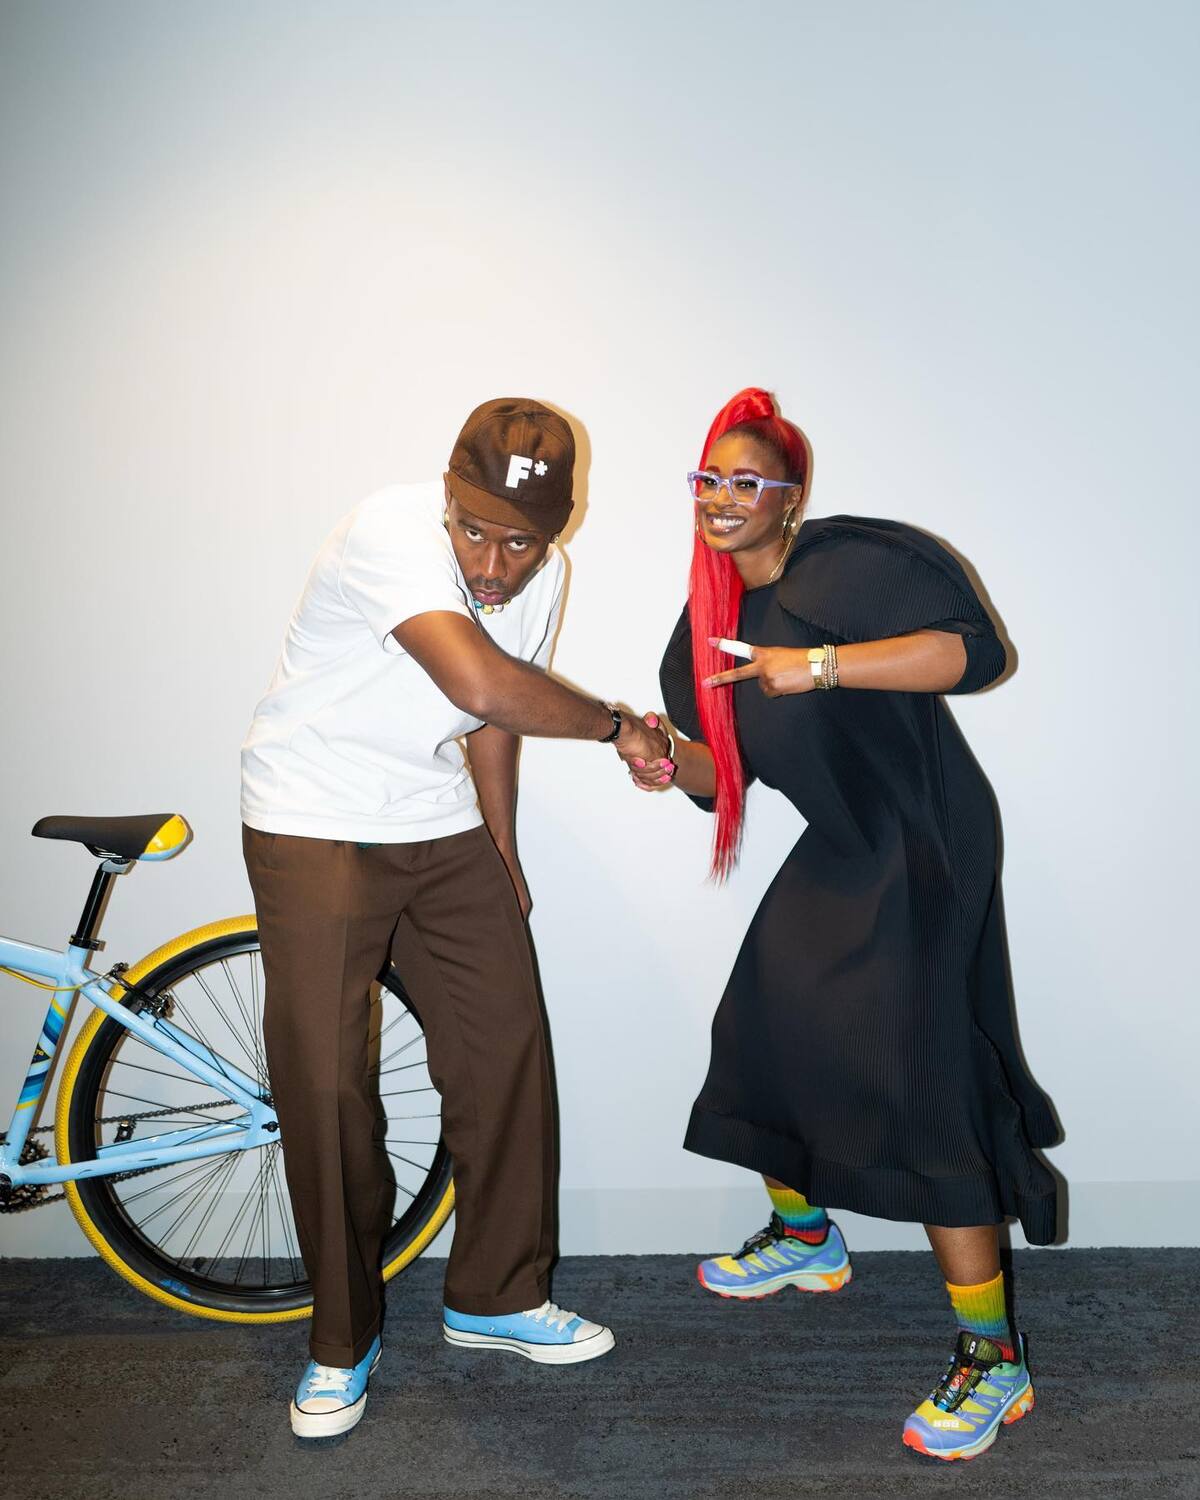 SPOTTED: Tyler, The Creator & Tierra Whack Hang Out in Salomon